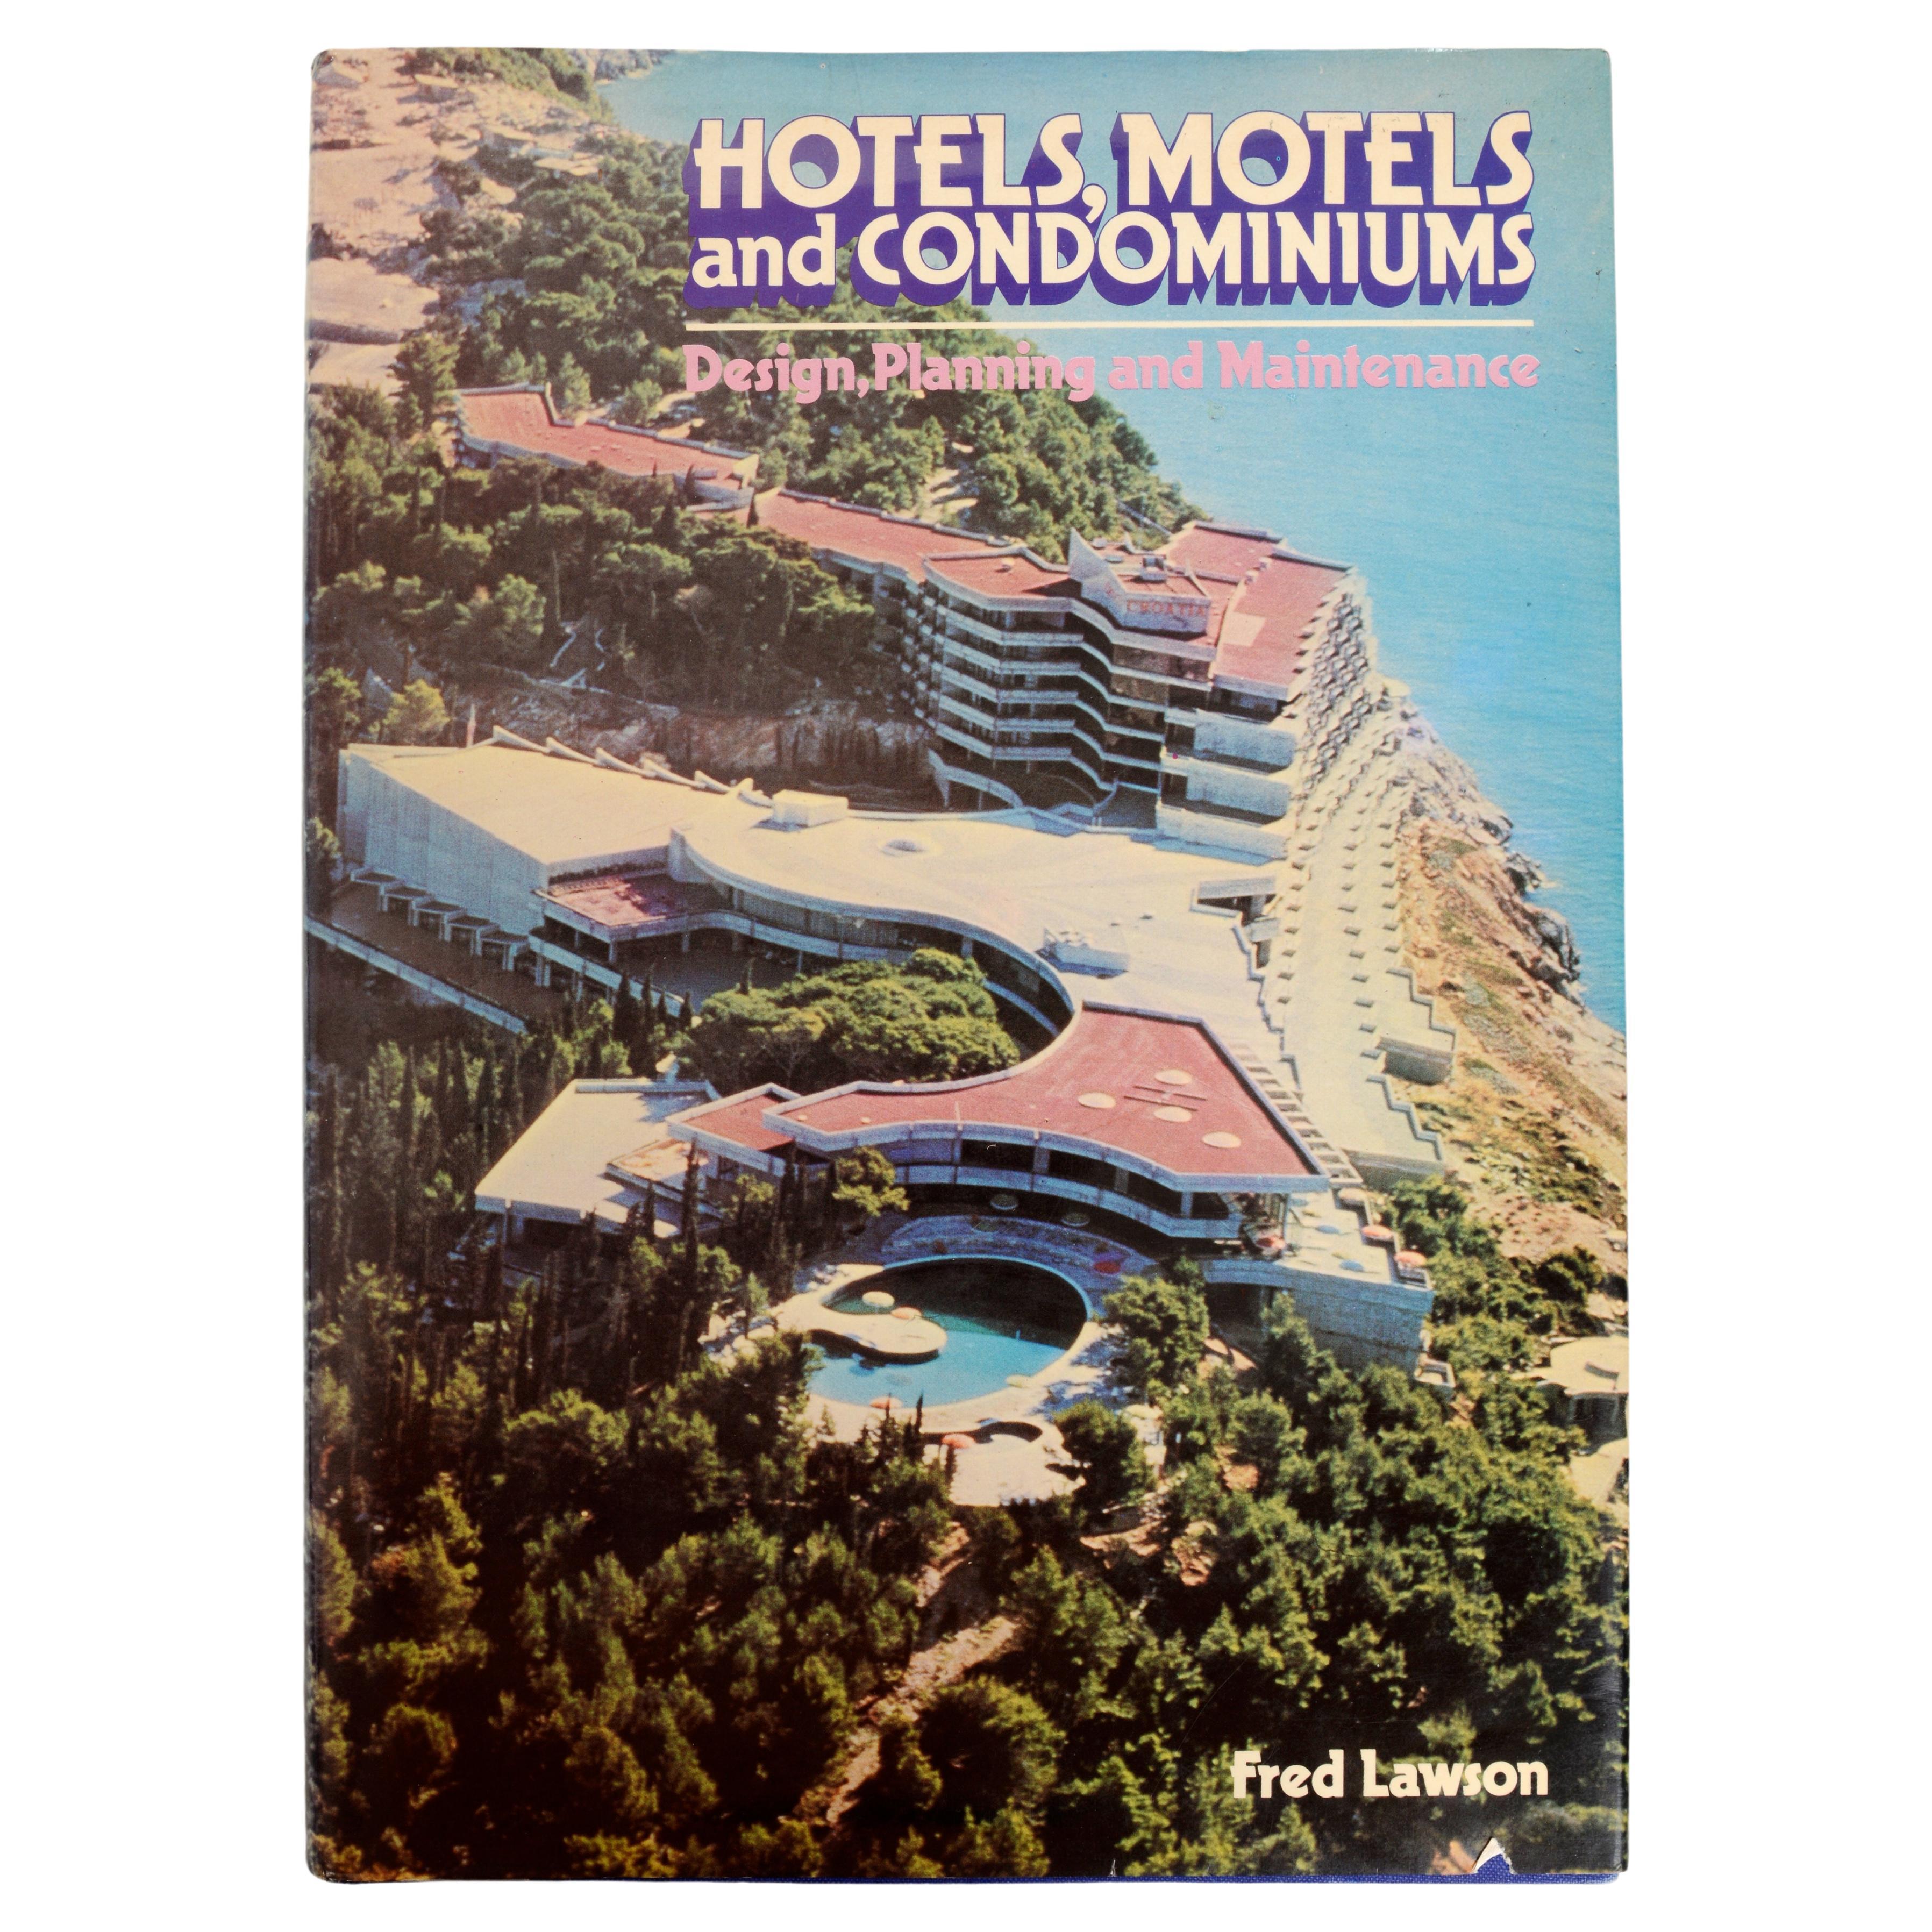 Hotels, Motels & Condominiums Planning, Design & Maintenance by Fred Lawson For Sale